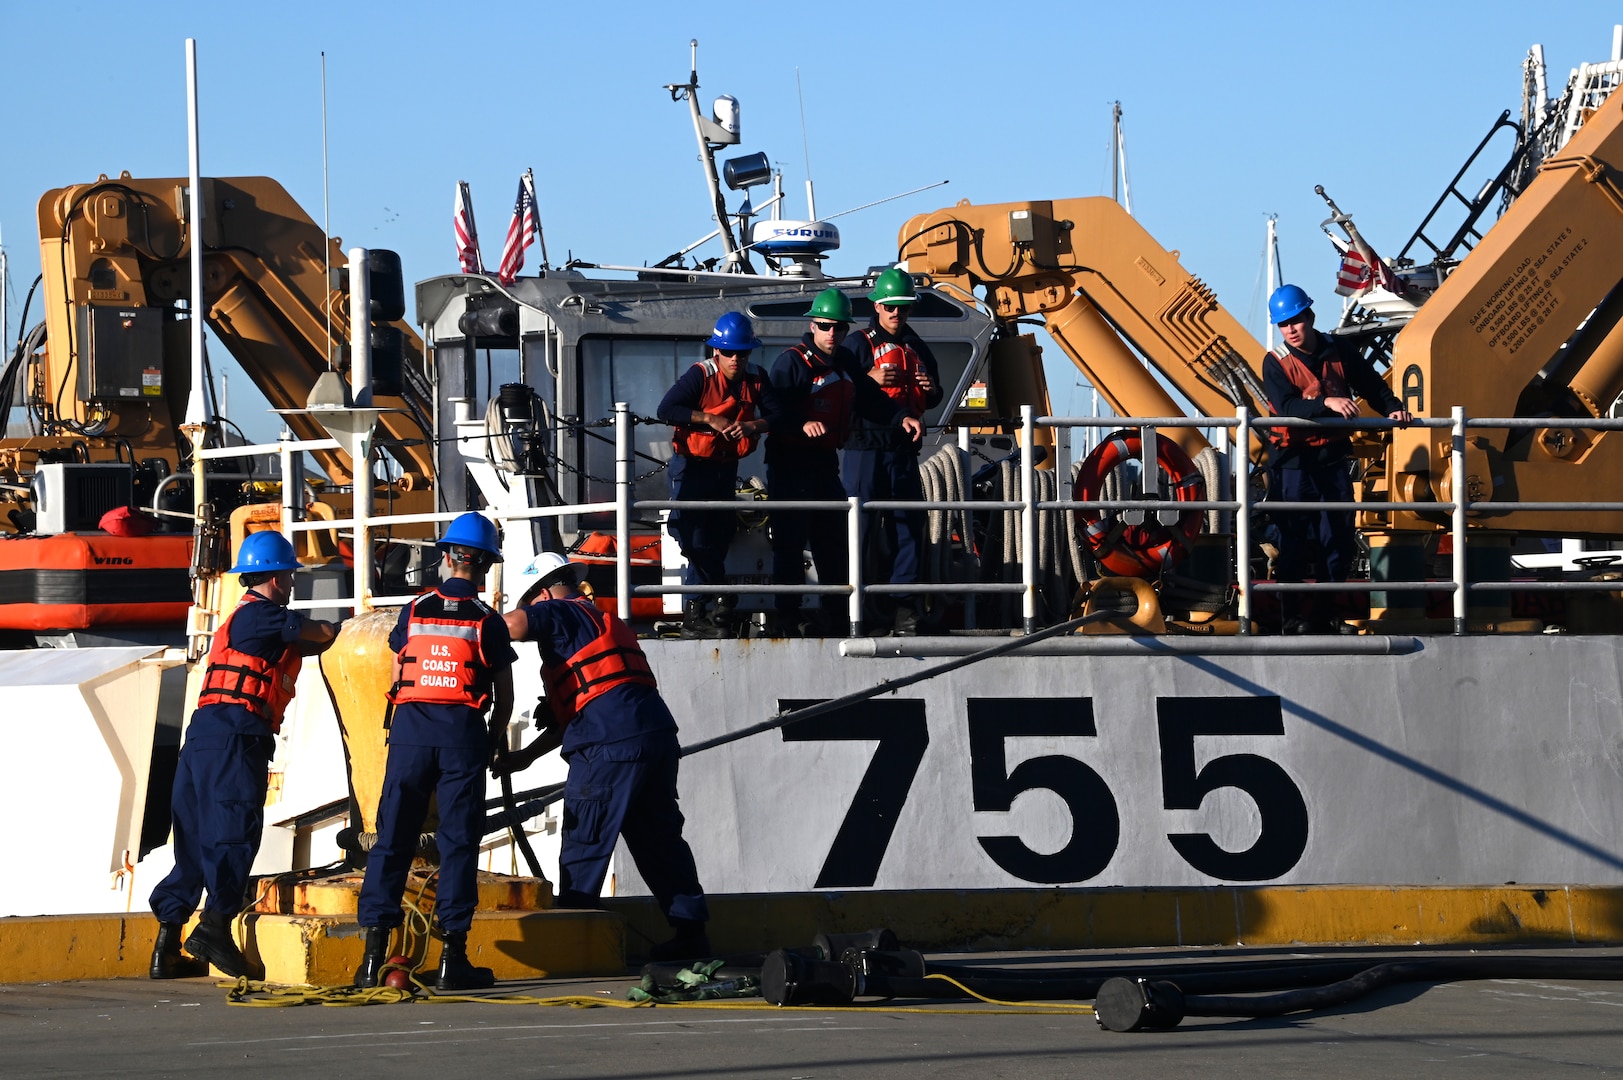 Line handlers secure lines from the U.S. Coast Guard Cutter Munro (WSML 755) to the pier on Base Alameda, California, after the cutter returned home from a 118-day Western Pacific deployment, Oct. 18. 2023. Munro's crew conducted a 23,000-mile, multi-month Western Pacific patrol operating in support of the U.S. Navy's Seventh Fleet by conducting multiple engagements with partner nations promoting a free and open Indo-Pacific. U.S. Coast Guard photo by Chief Petty Officer Matthew S. Masaschi.